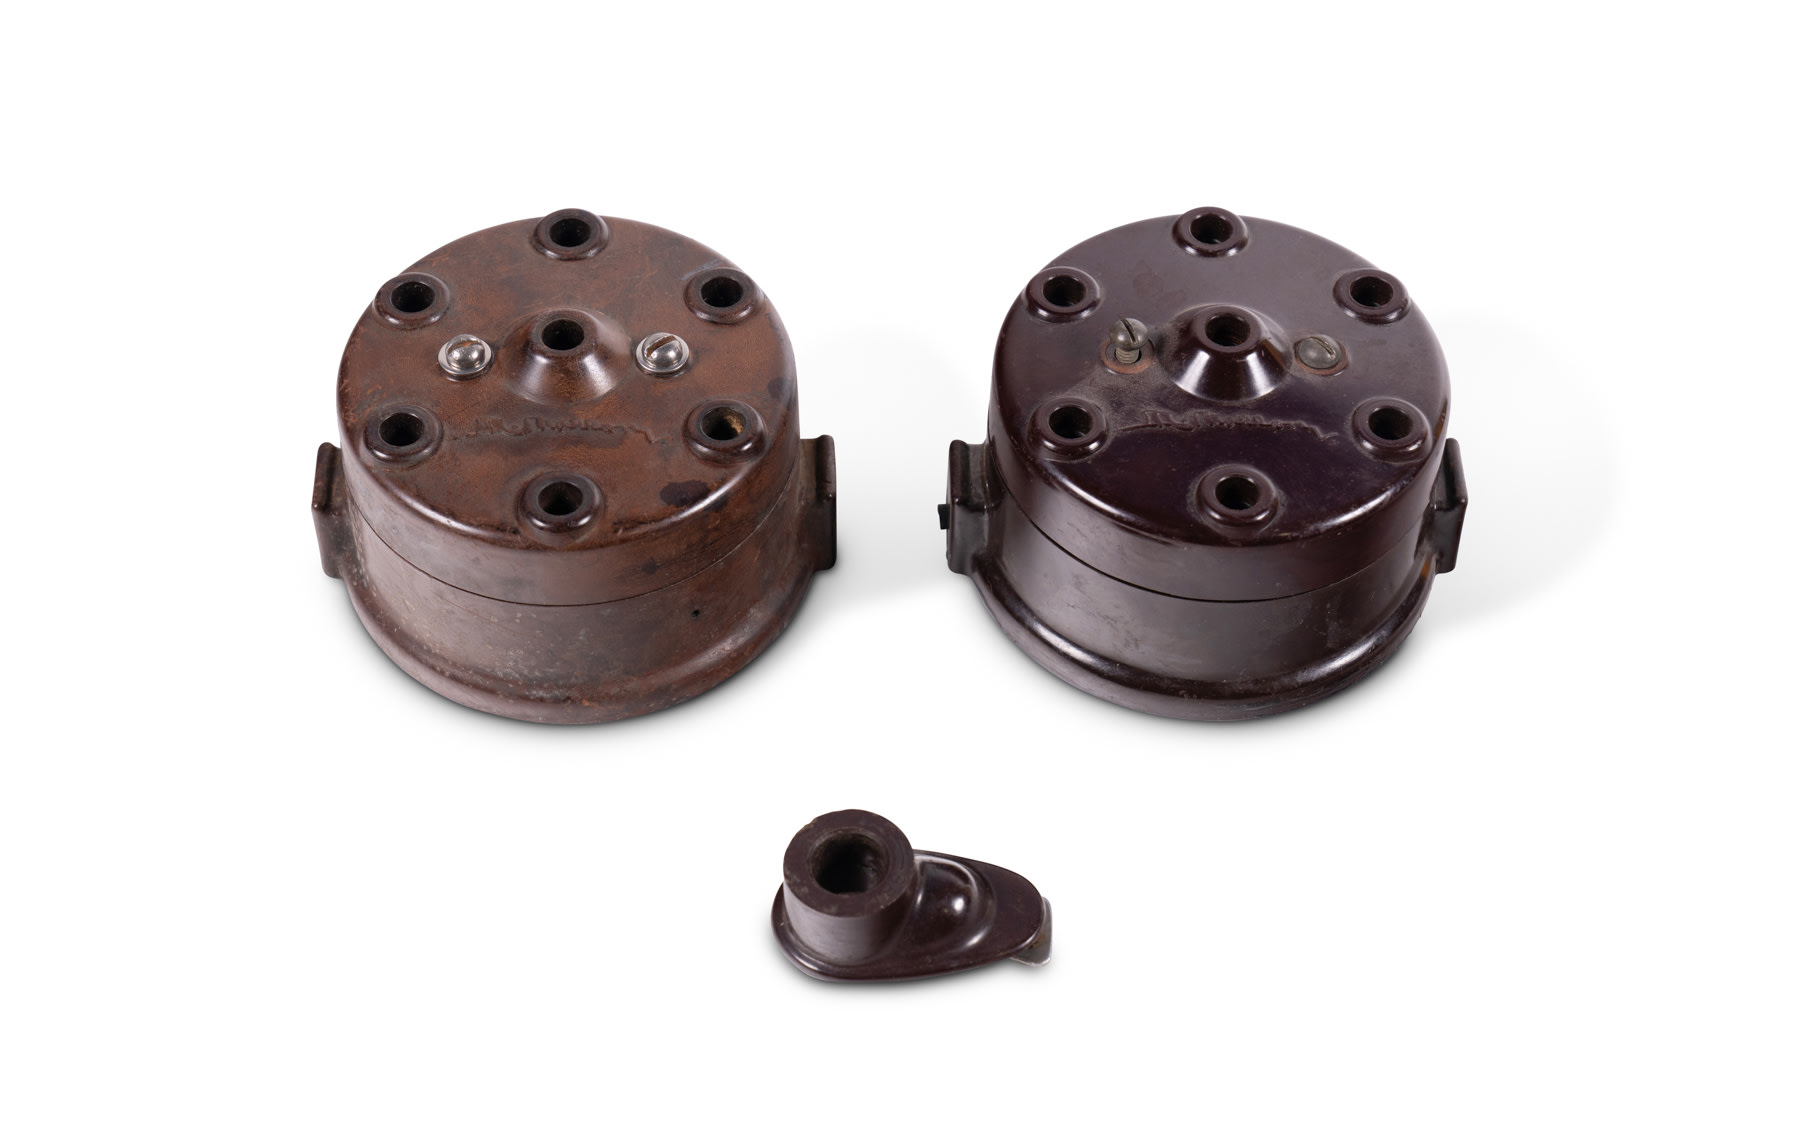 Pair of Mallory Six-Cylinder Distributor Caps